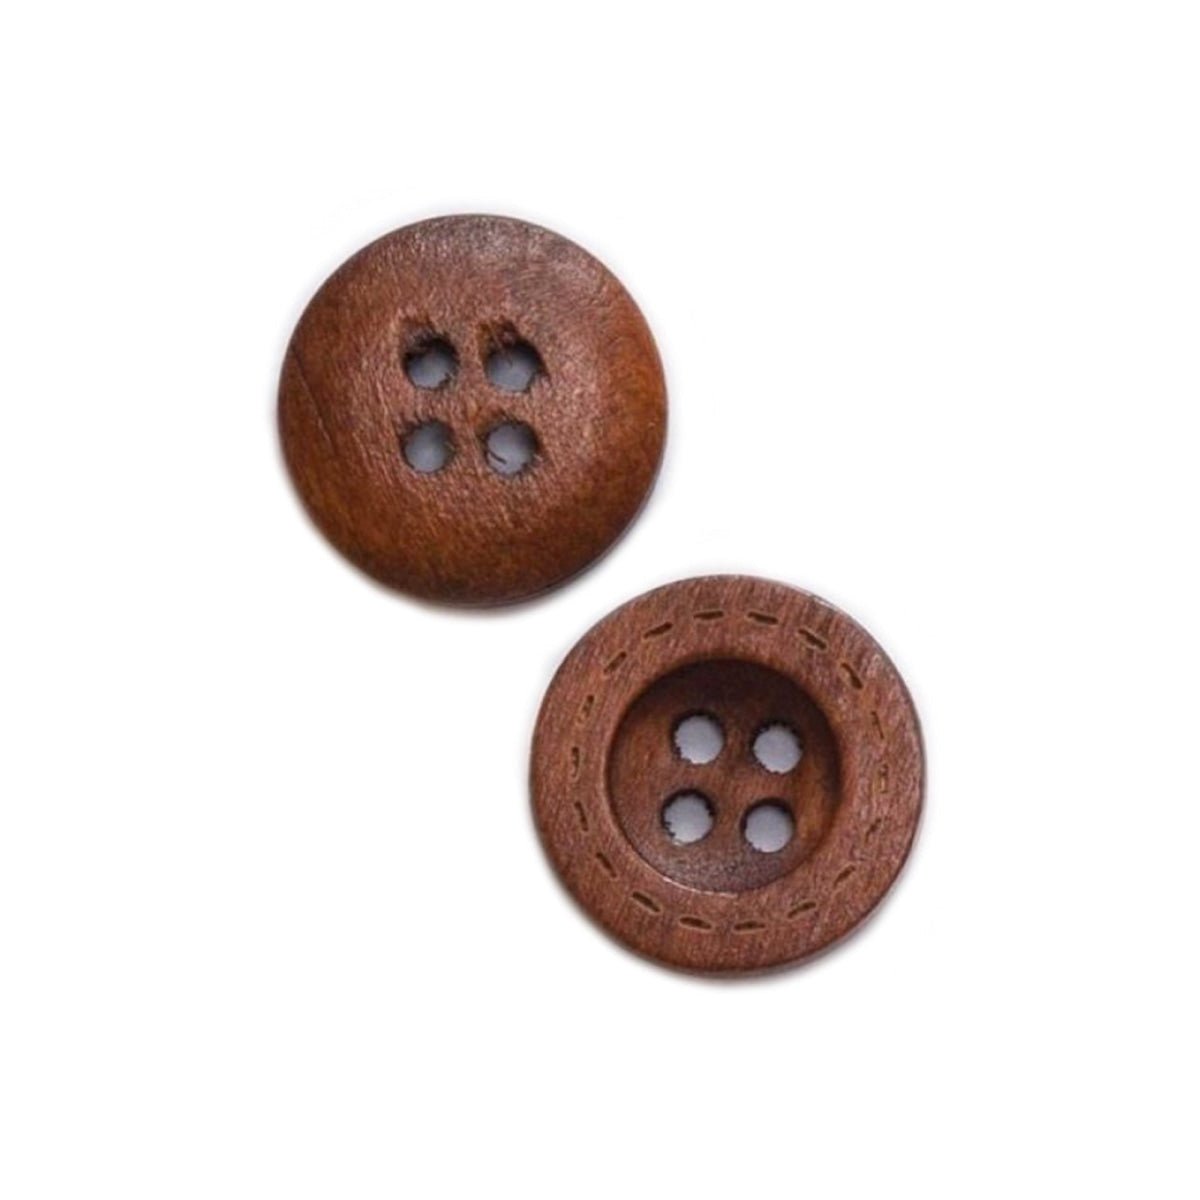 50pcs 13mm-18mm 4 Hole Wooden Buttons for Sewing Clothing Jacket Blazer Sweaters - Dark Brown 15mm - - Asia Sell